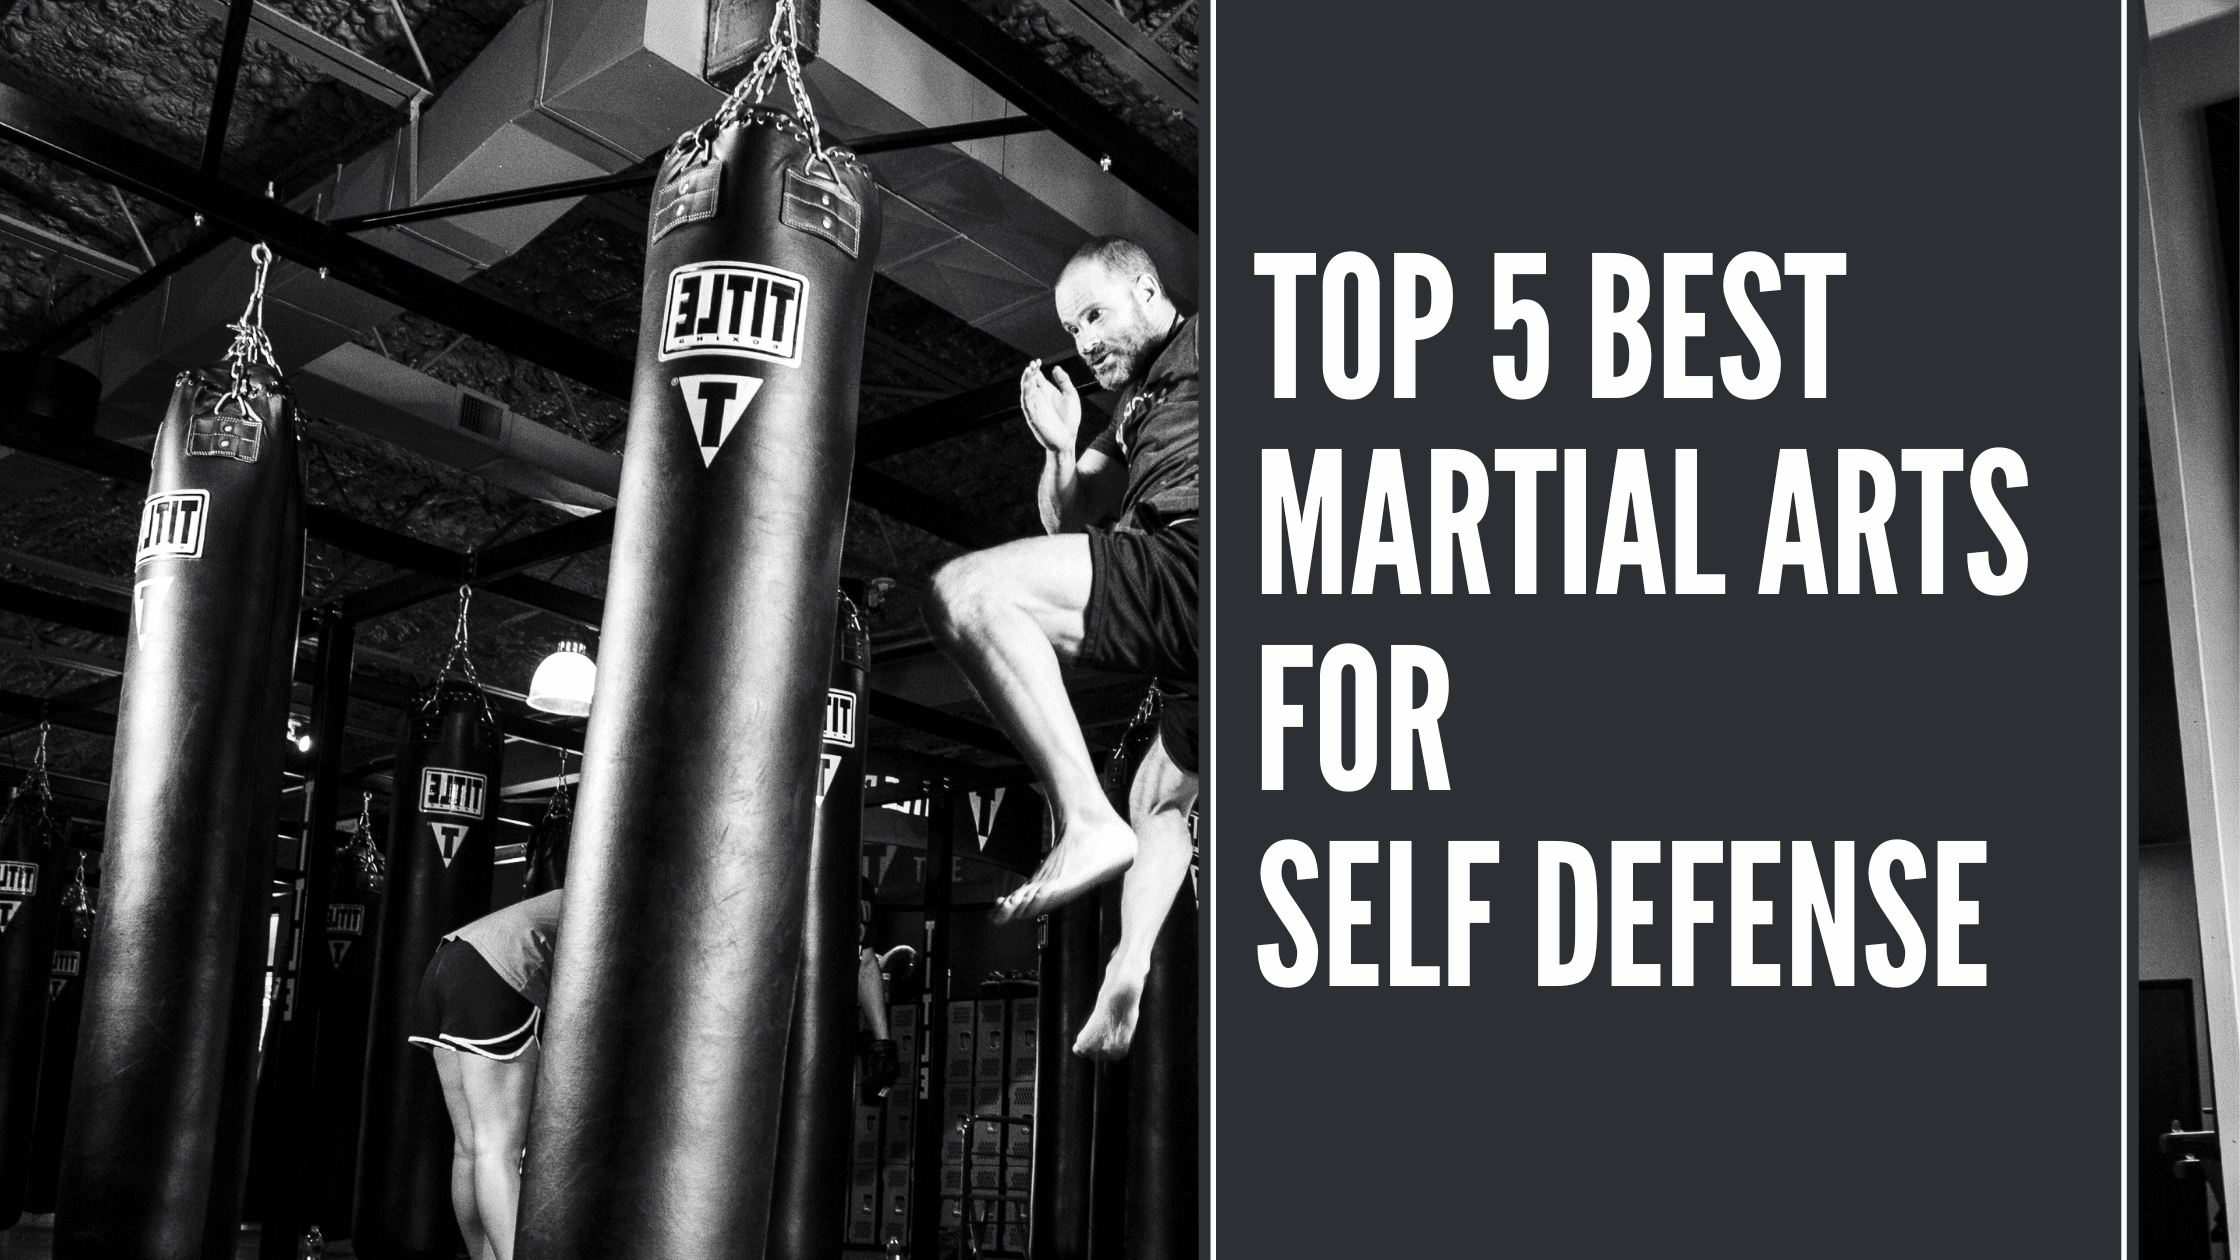 Find the best martial arts for self defense